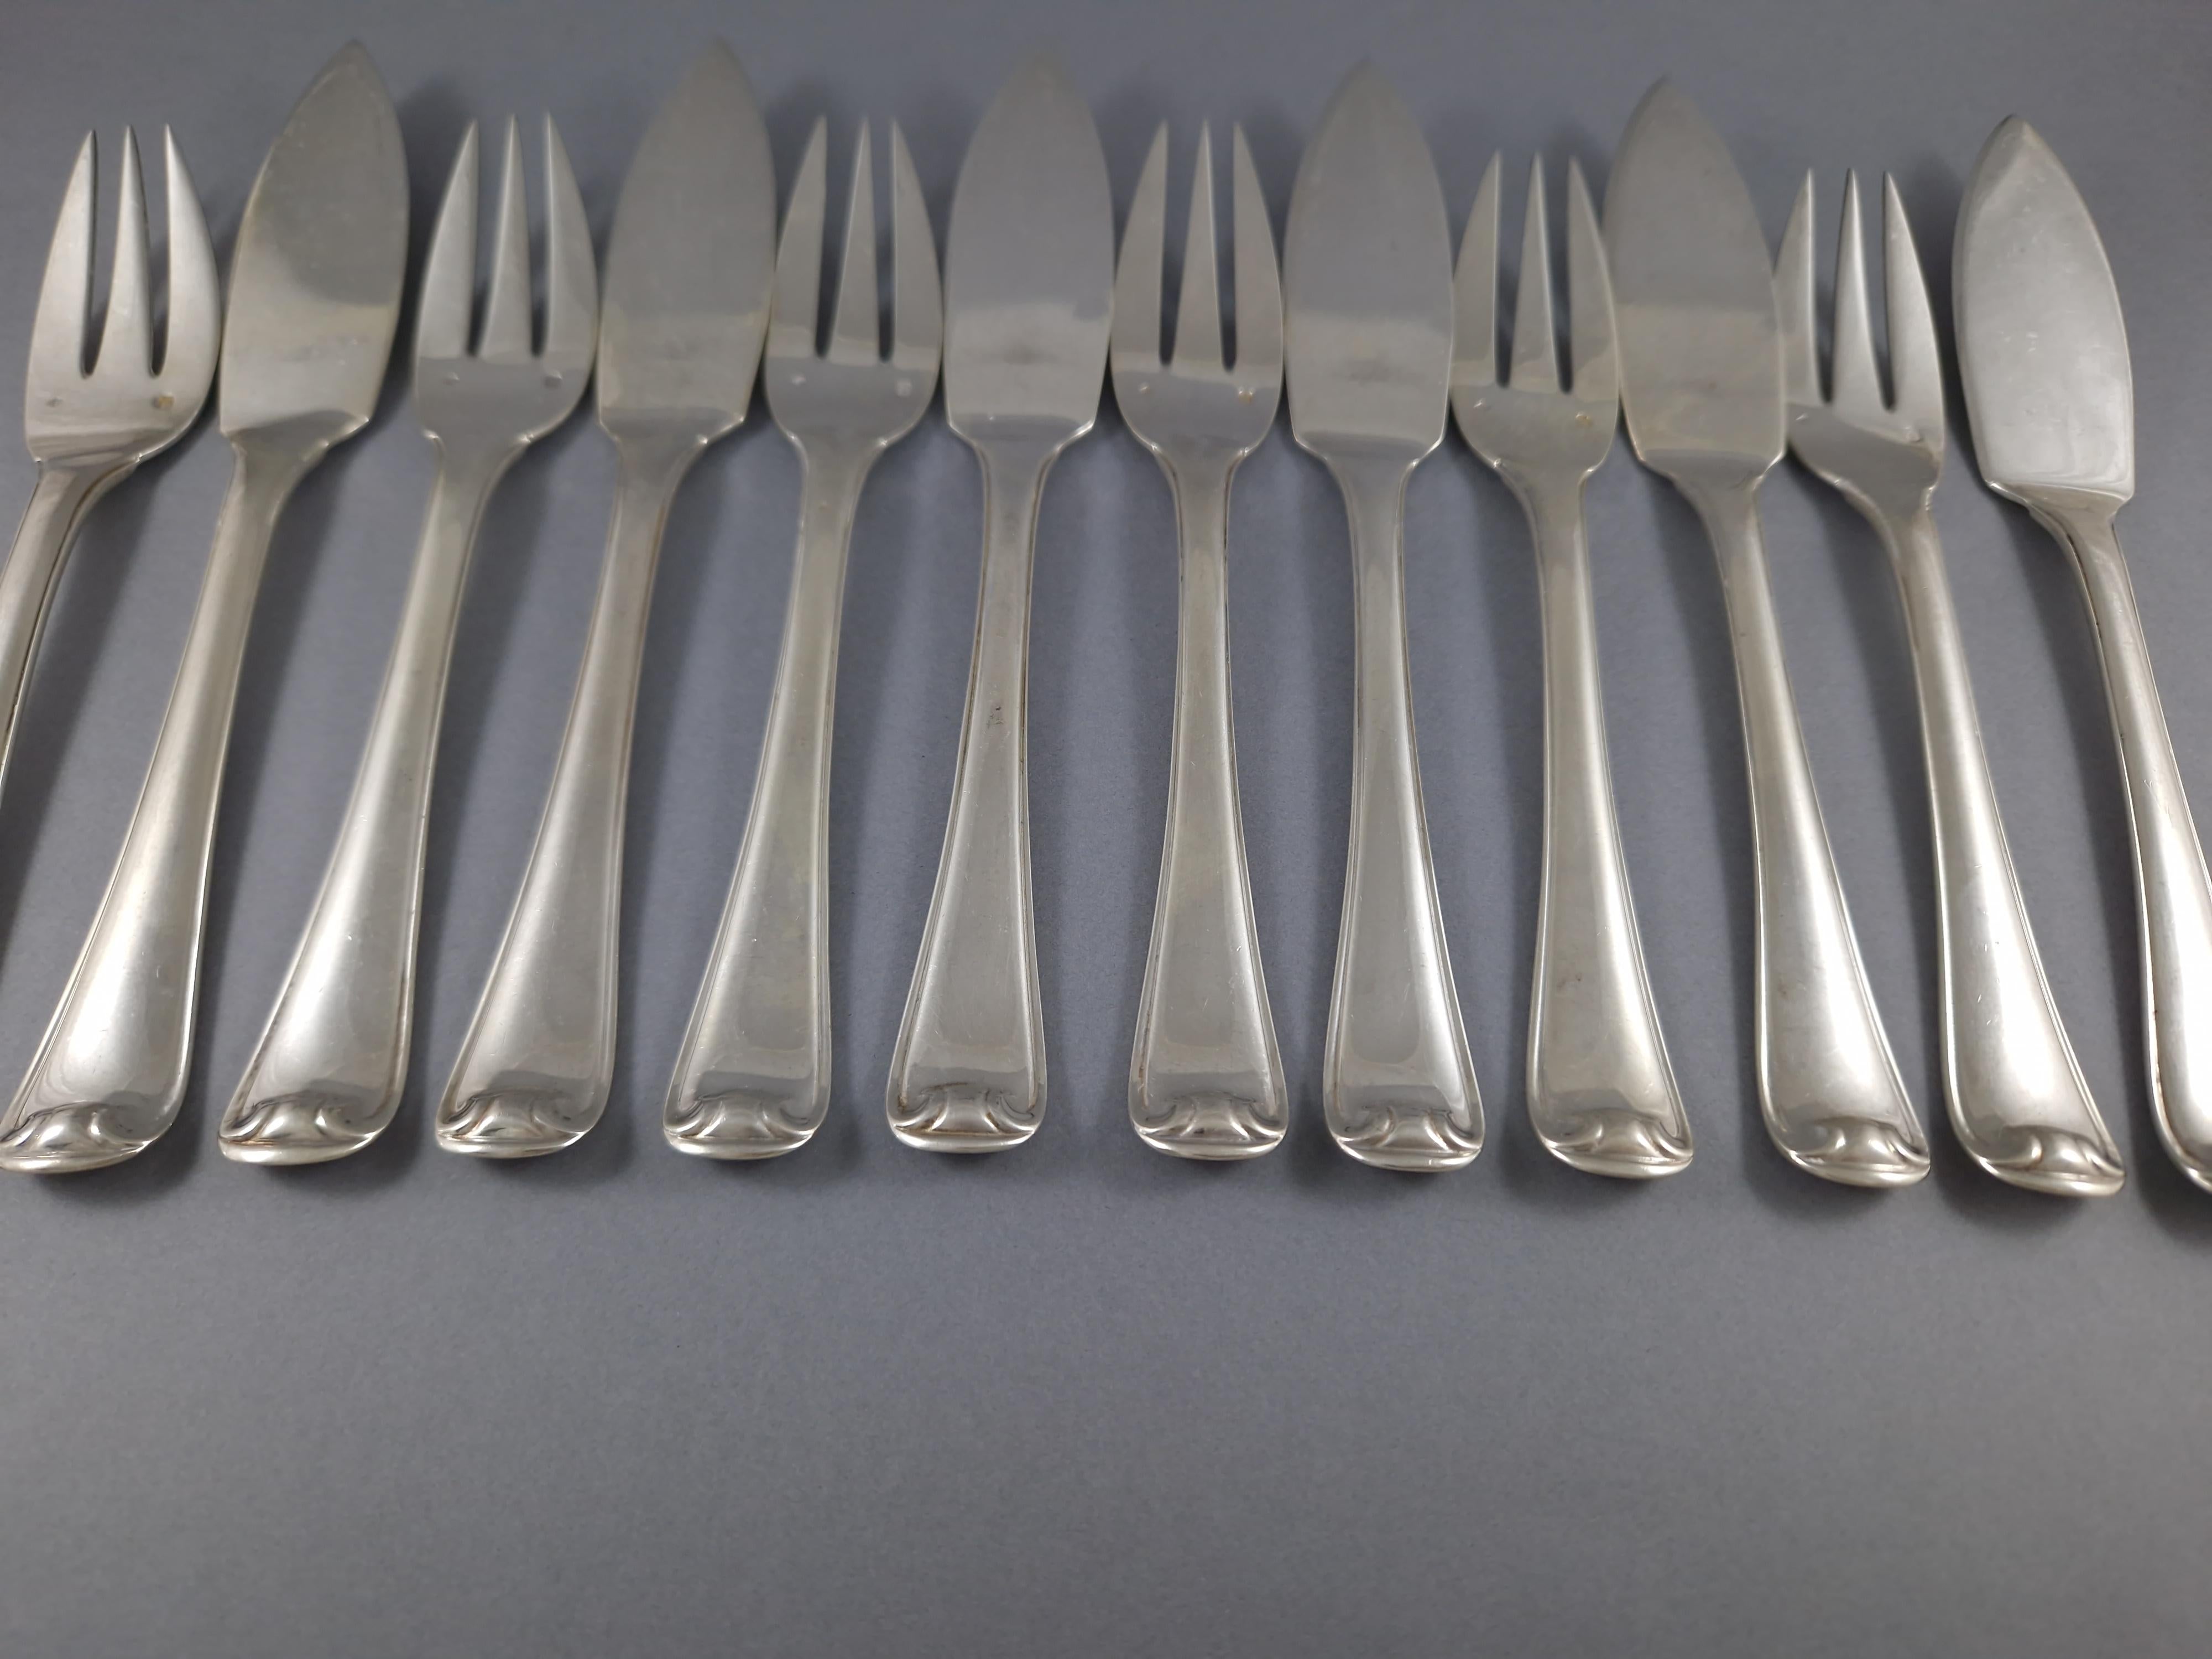 Six fish cutlery in Sterling Silver by Puiforcat 
Mazarin model 
Minerva hallmark 1st title for 950/1000 purity silver
EP Silversmith hallmark for Puiforcat 
Forks: 17.9 cm 
Knives: 20.7 cm 
Total weight: 845 grams